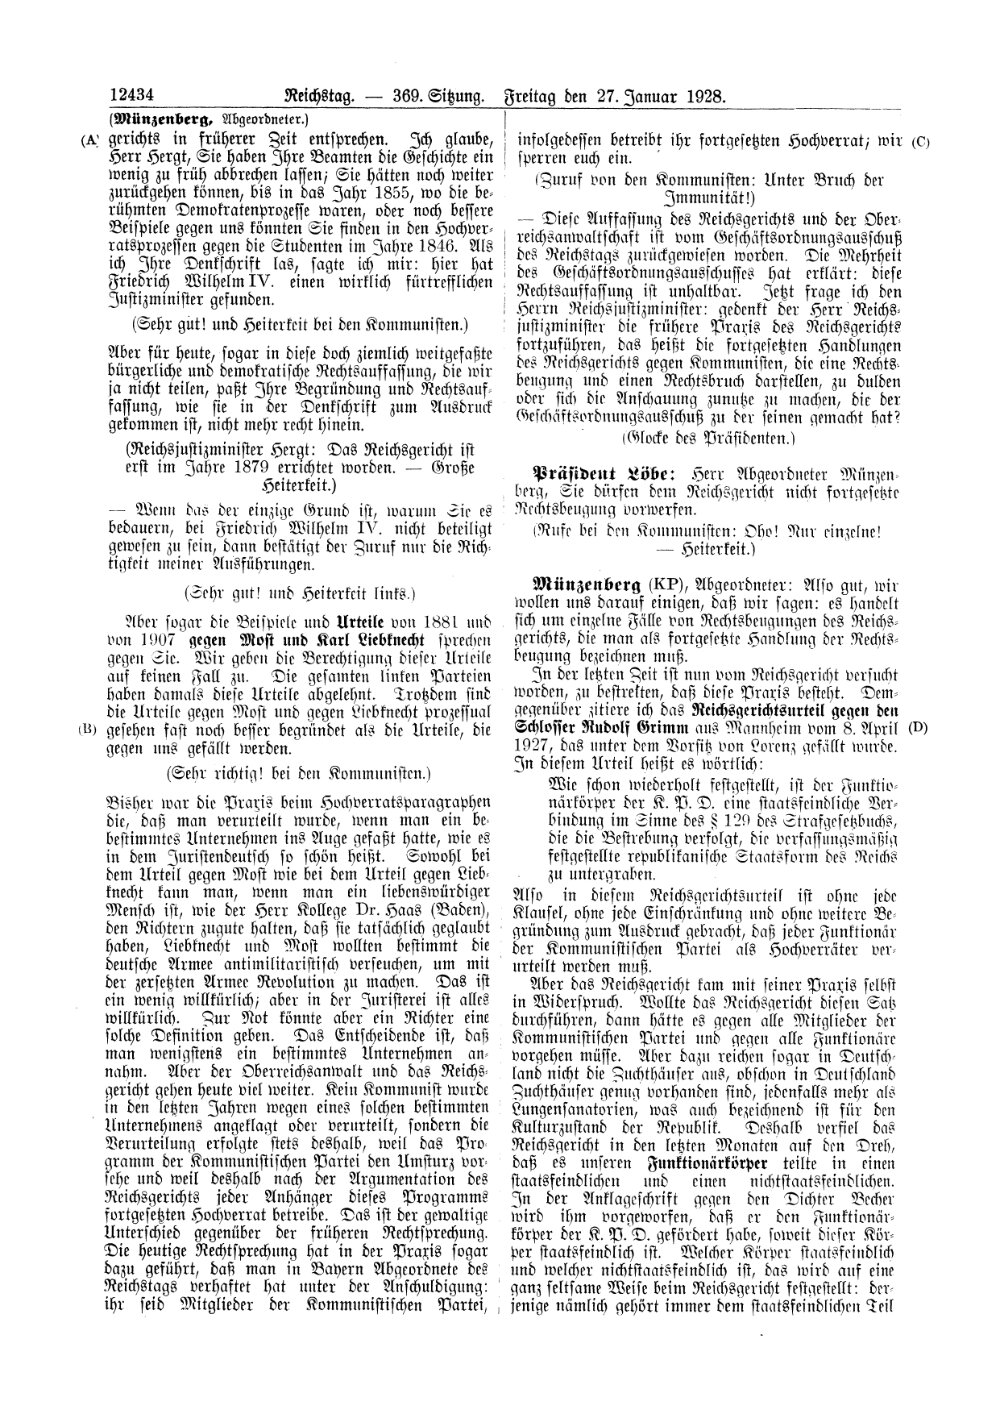 Scan of page 12434